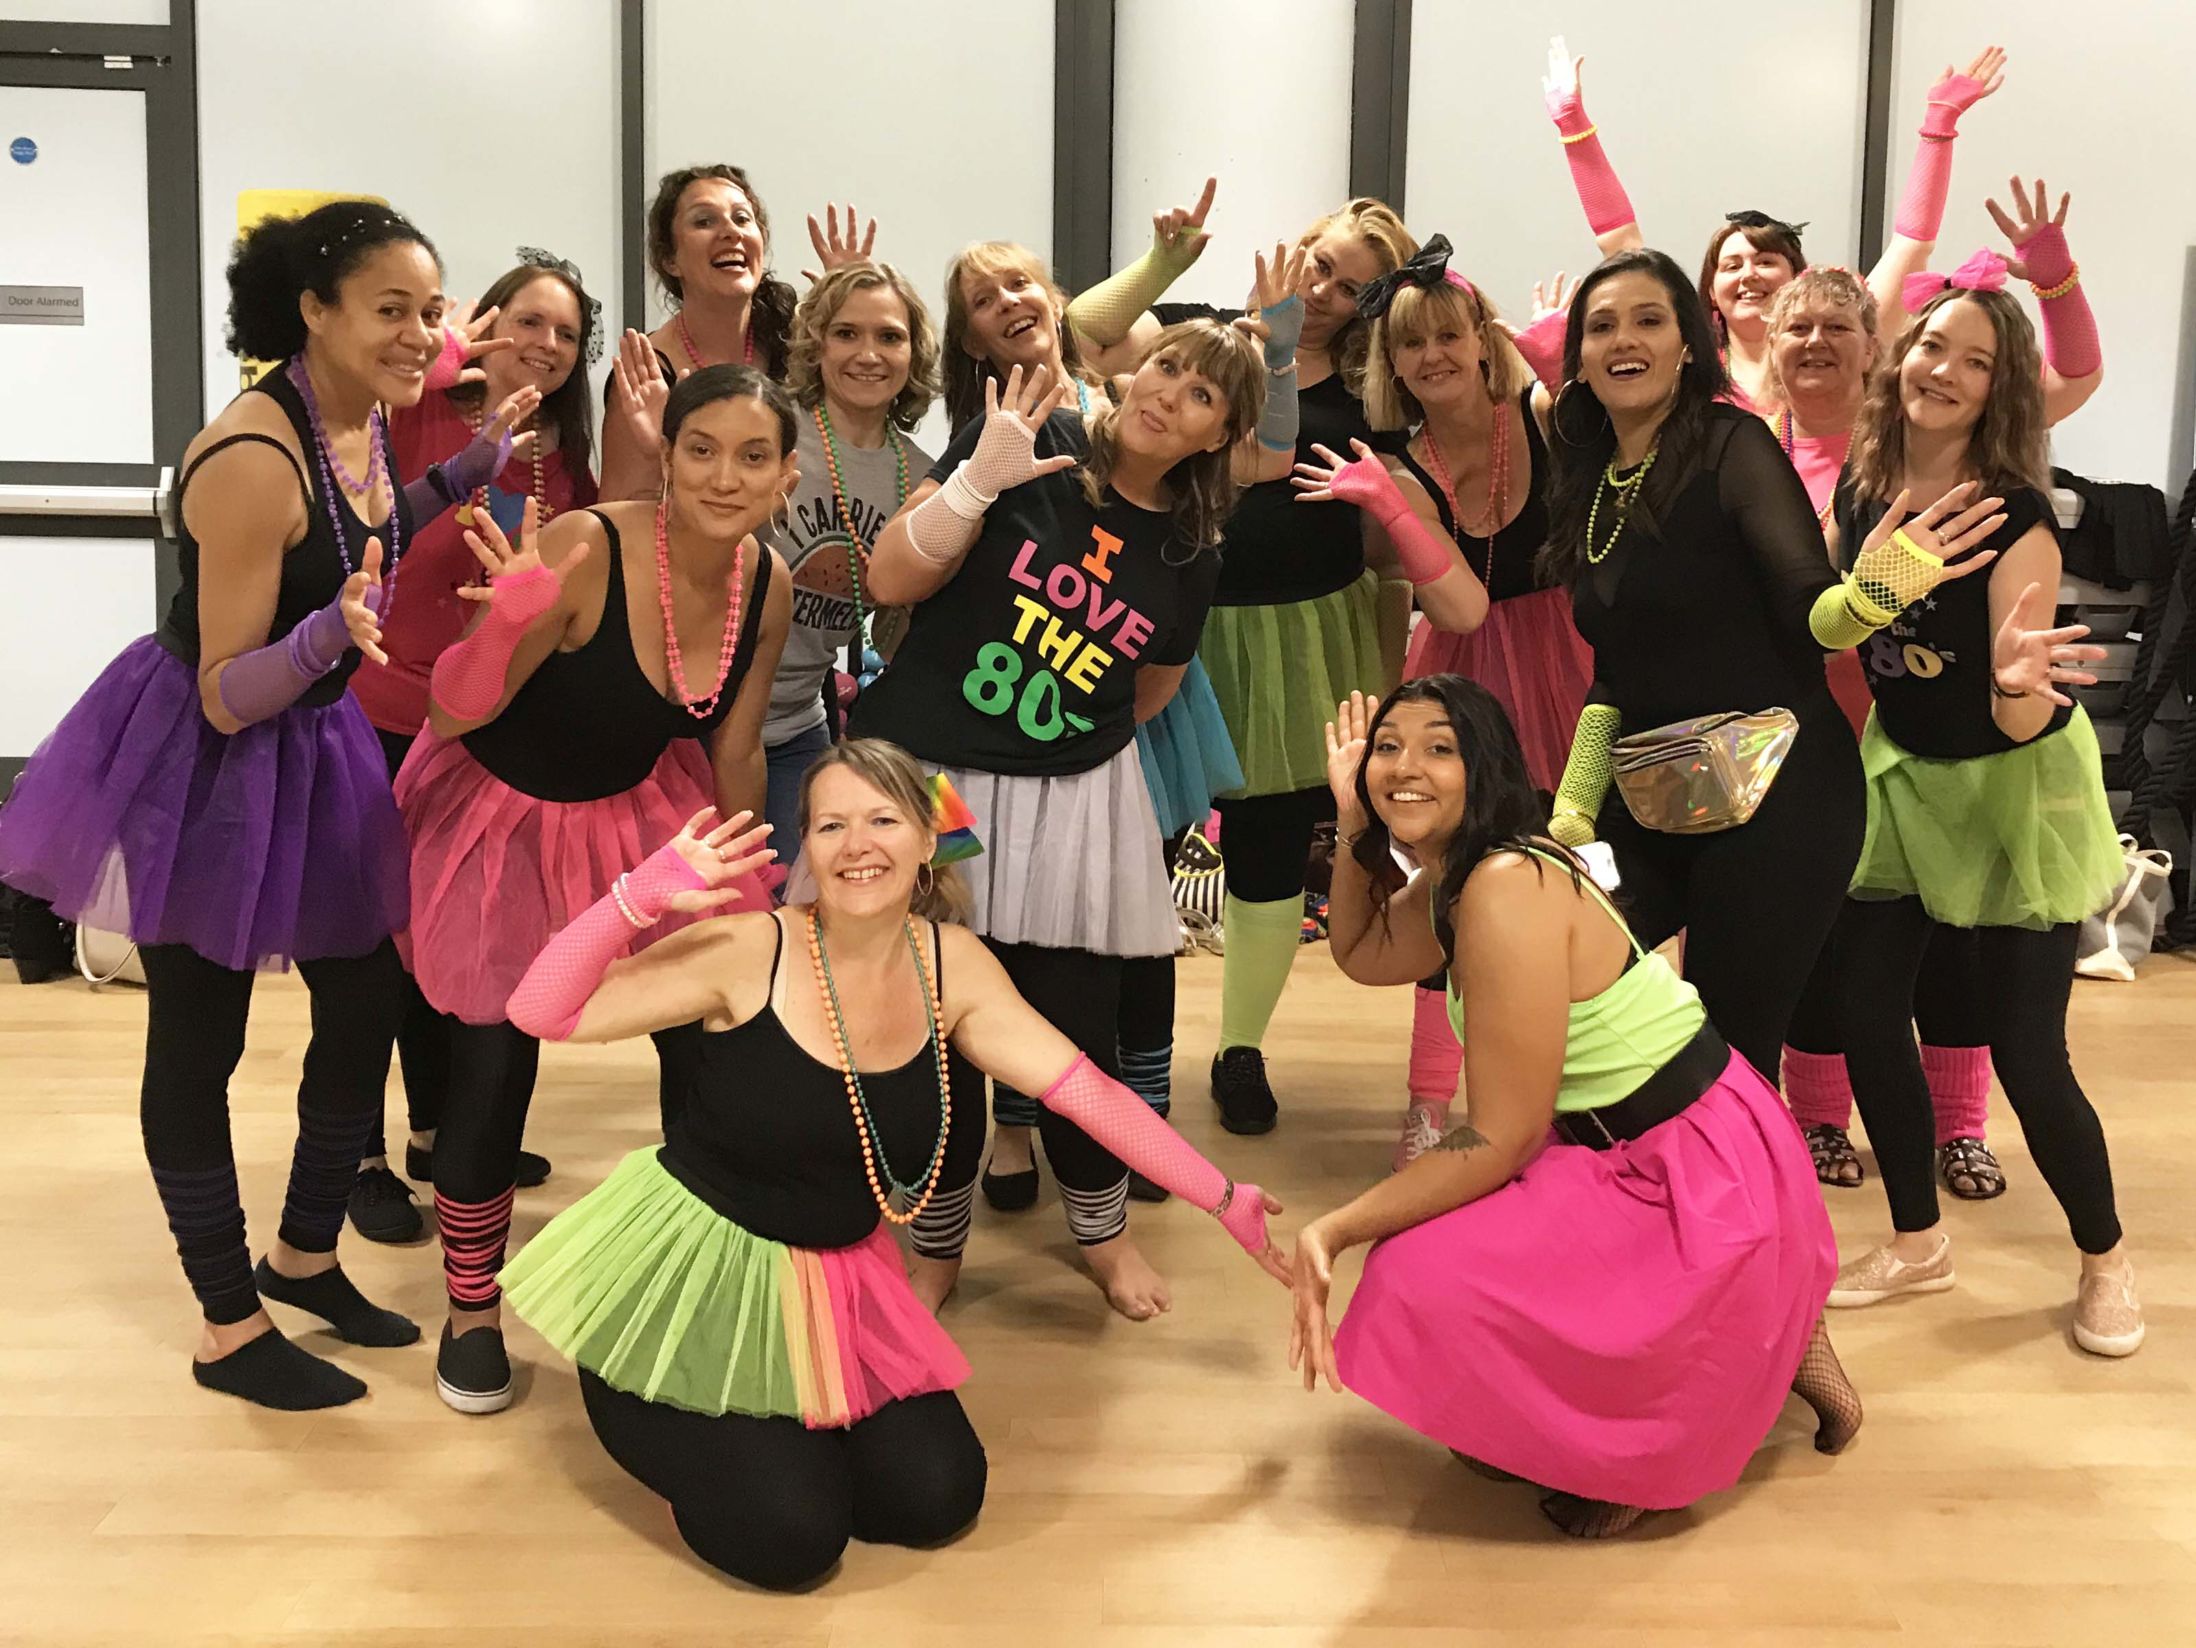 Greatest Hen Party Activities & Ideas in Cardiff - Dance Classes